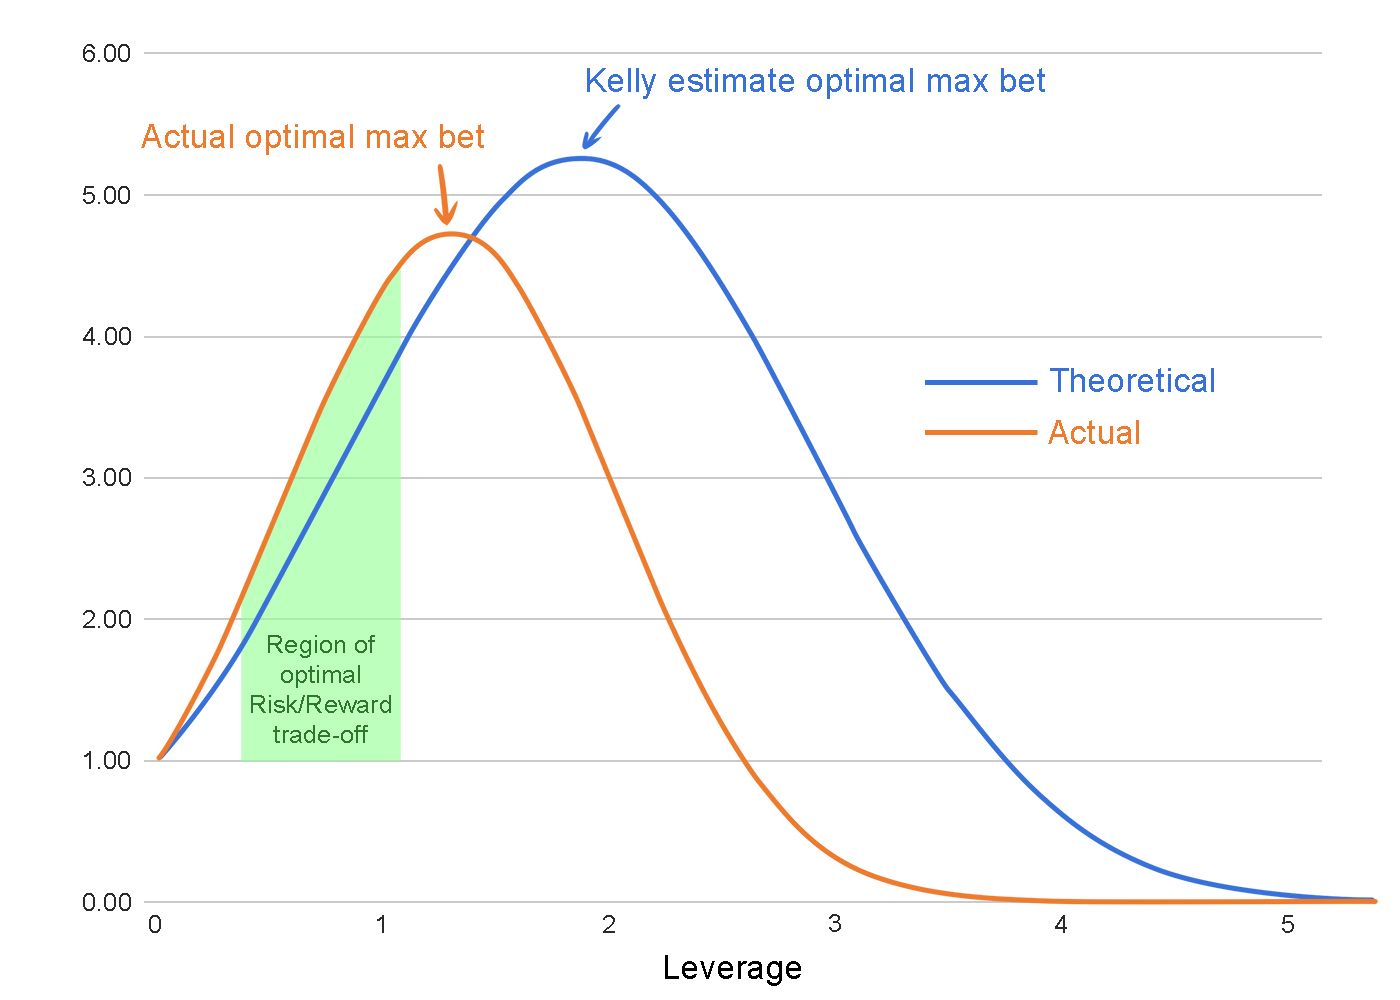 The Kelly Criterion